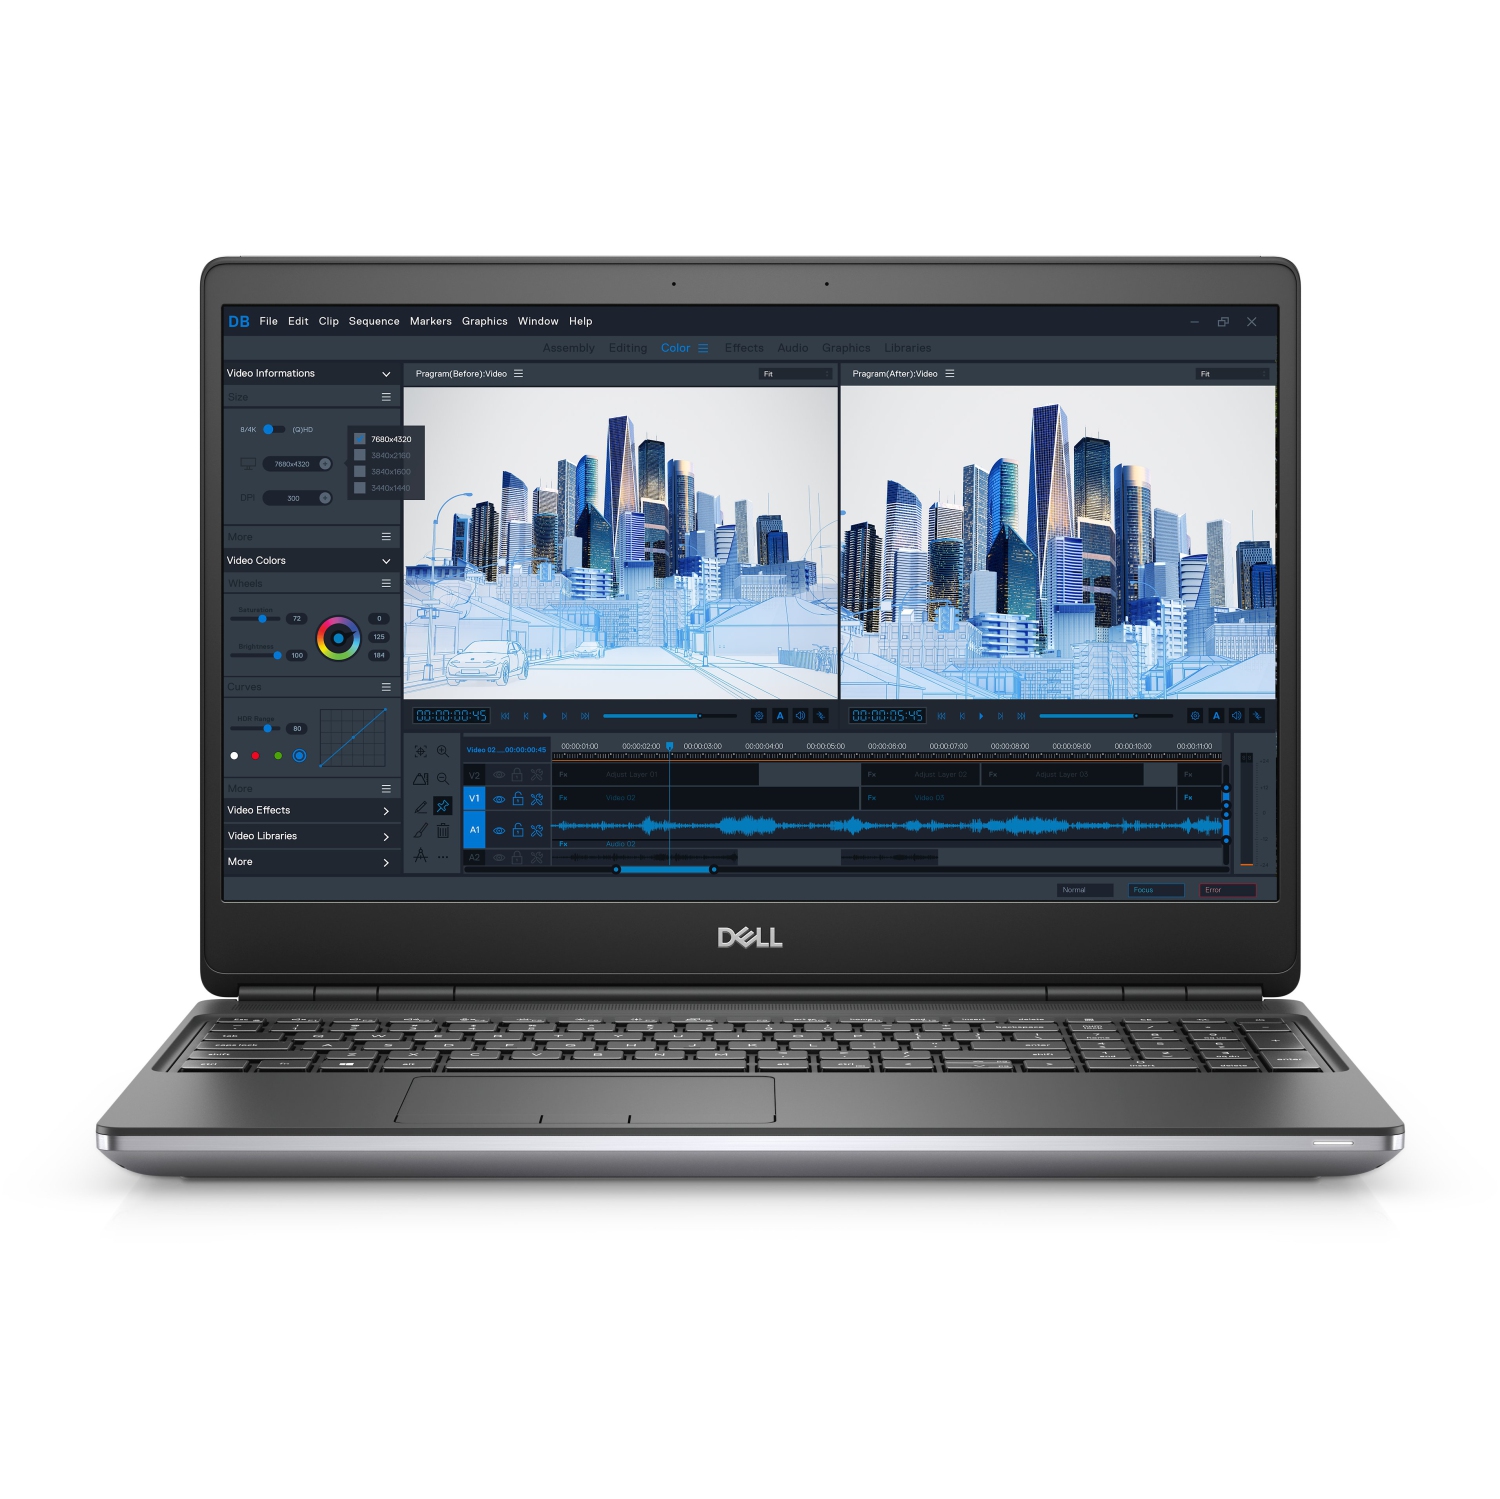 Refurbished (Excellent) - Dell Precision 7000 7560 Workstation Laptop (2021), 15.6" FHD, Core i7, 2TB SSD, 64GB RAM, RTX A4000, 4.8 GHz, 11th Gen CPU Certified